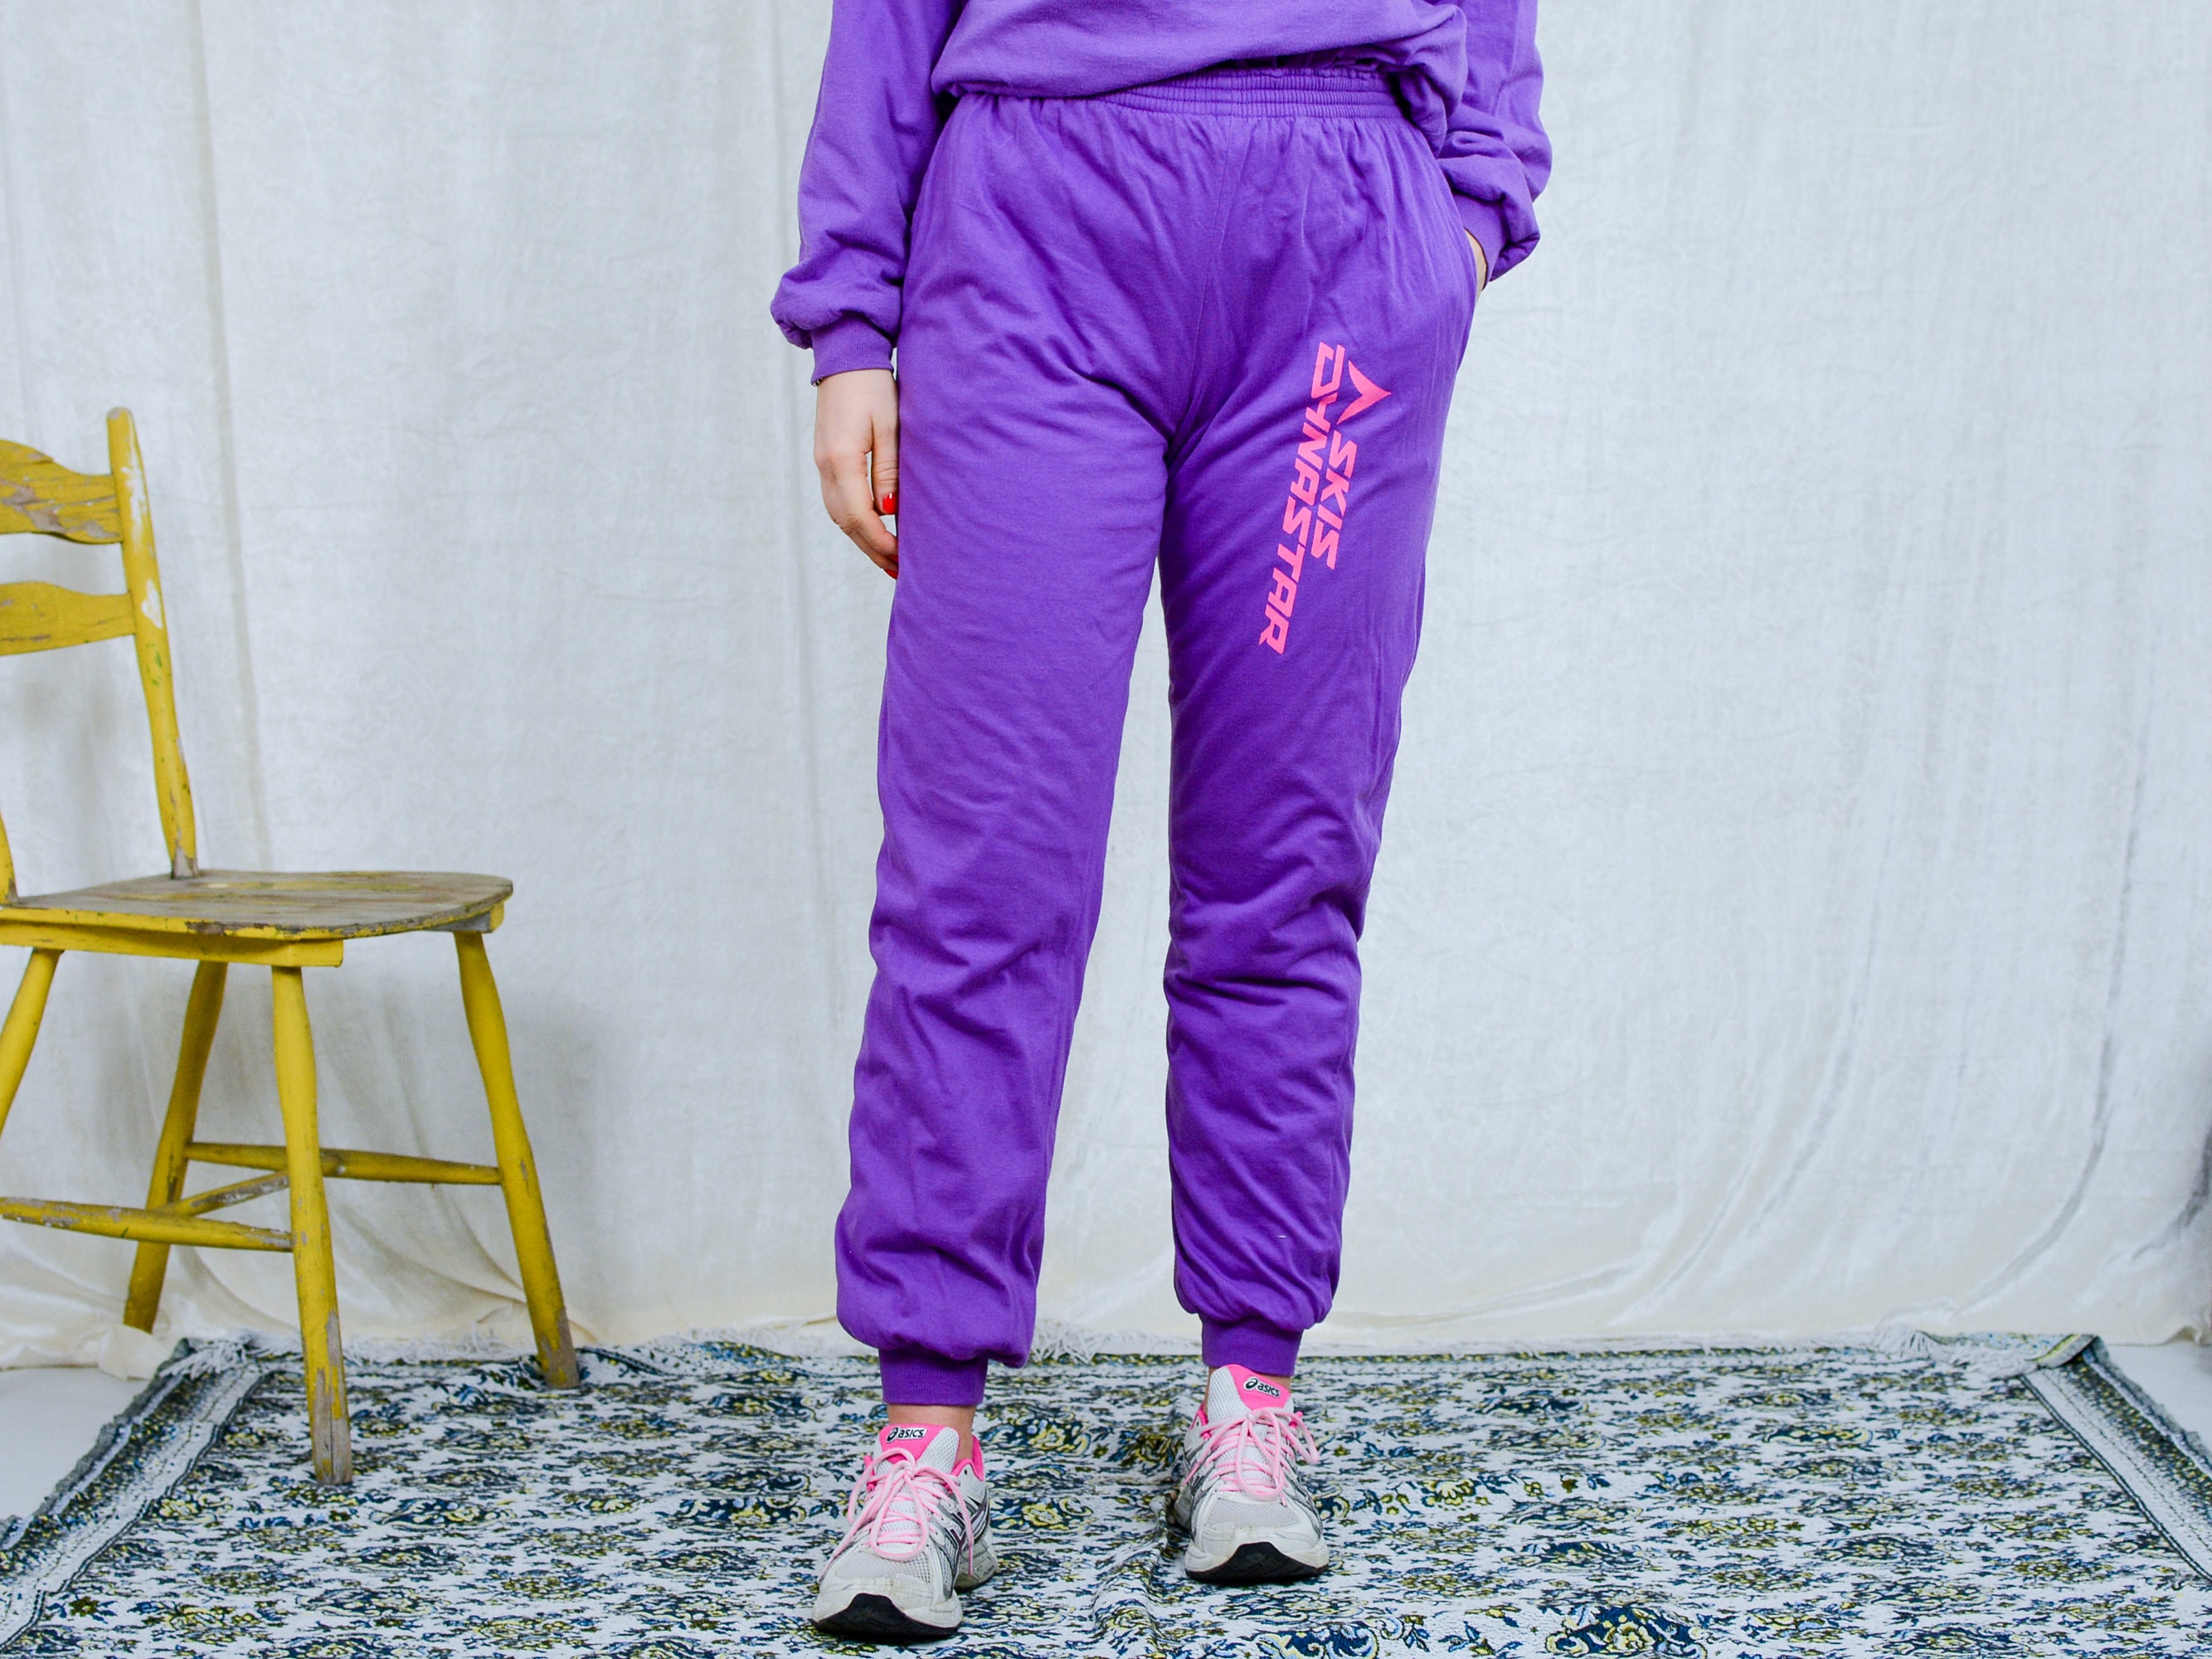 SKIS DYNASTAR Tracksuit Vintage 90s Insulated Purple Lined Snow